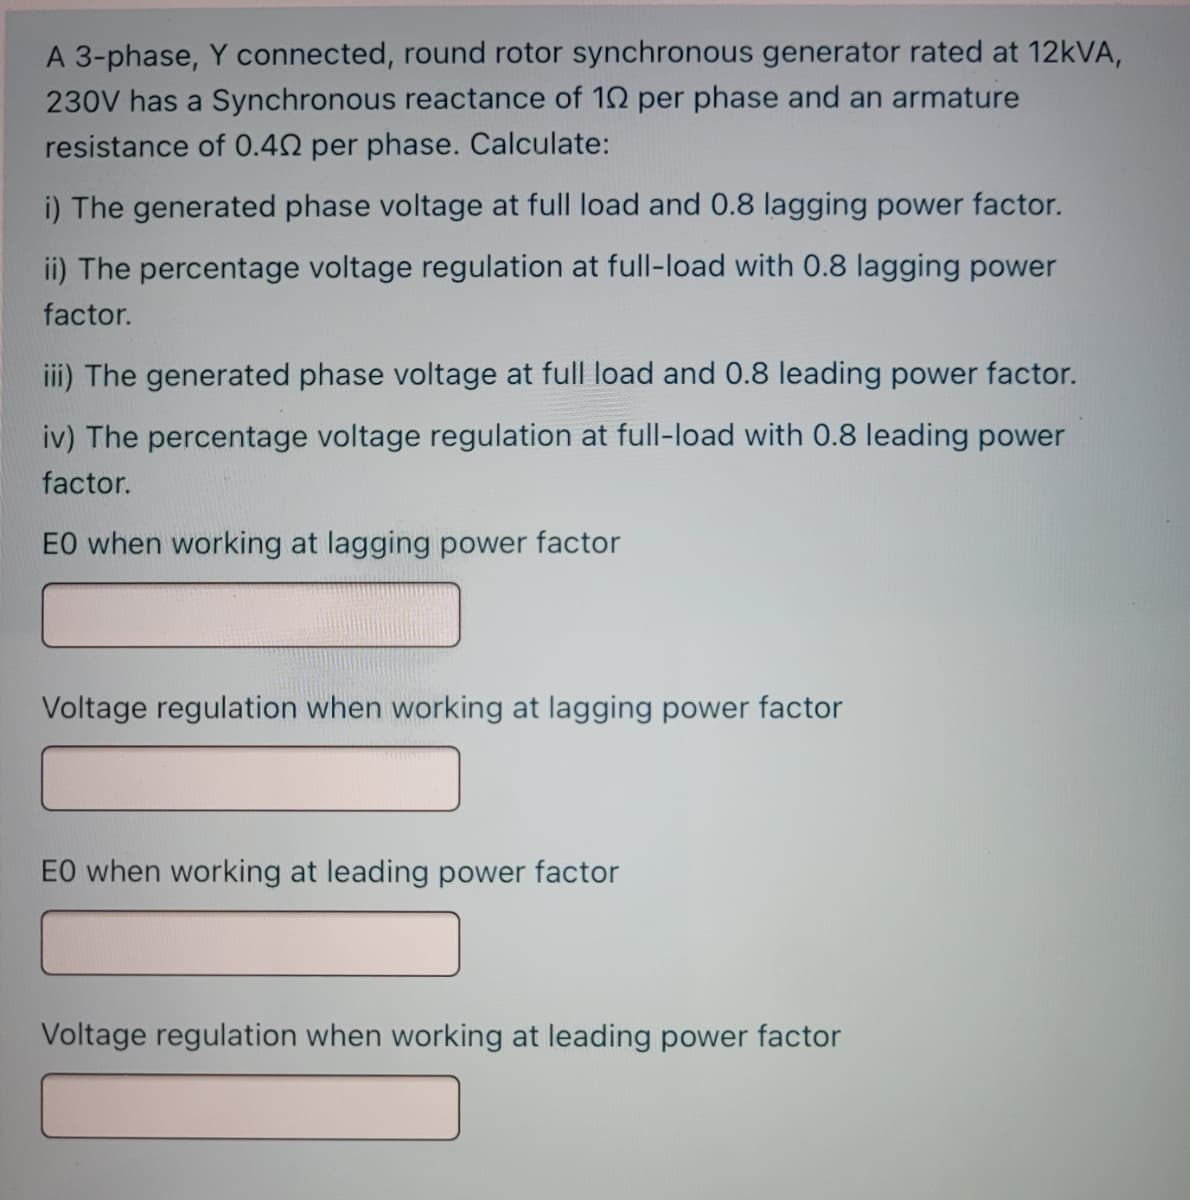 A 3-phase, Y connected, round rotor synchronous generator rated at 12KVA,
230V has a Synchronous reactance of 12 per phase and an armature
resistance of 0.42 per phase. Calculate:
i) The generated phase voltage at full load and 0.8 lagging power factor.
ii) The percentage voltage regulation at full-load with 0.8 lagging power
factor.
iii) The generated phase voltage at full load and 0.8 leading power factor.
iv) The percentage voltage regulation at full-load with 0.8 leading power
factor.
EO when working at lagging power factor
Voltage regulation when working at lagging power factor
EO when working at leading power factor
Voltage regulation when working at leading power factor
